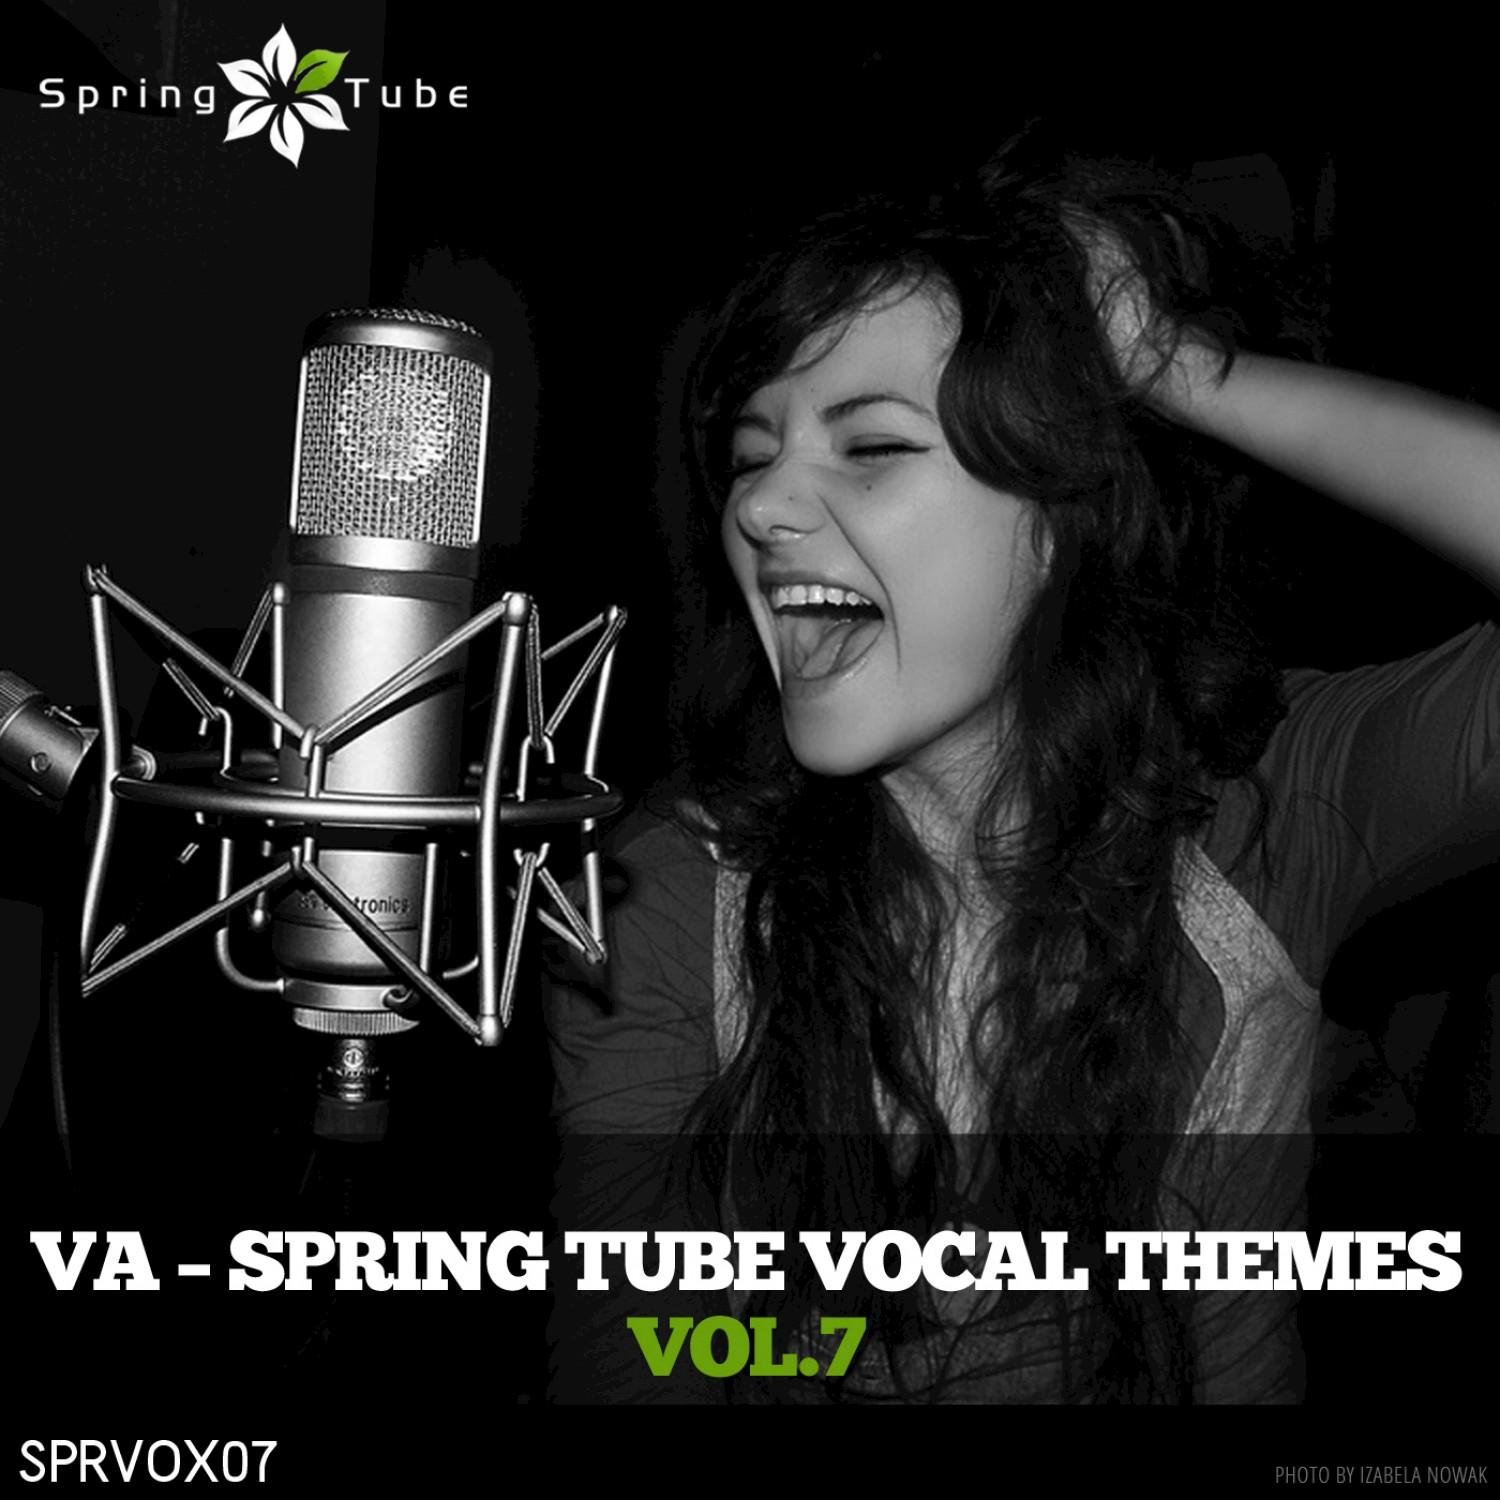 Spring Tube Vocal Themes, Vol. 7